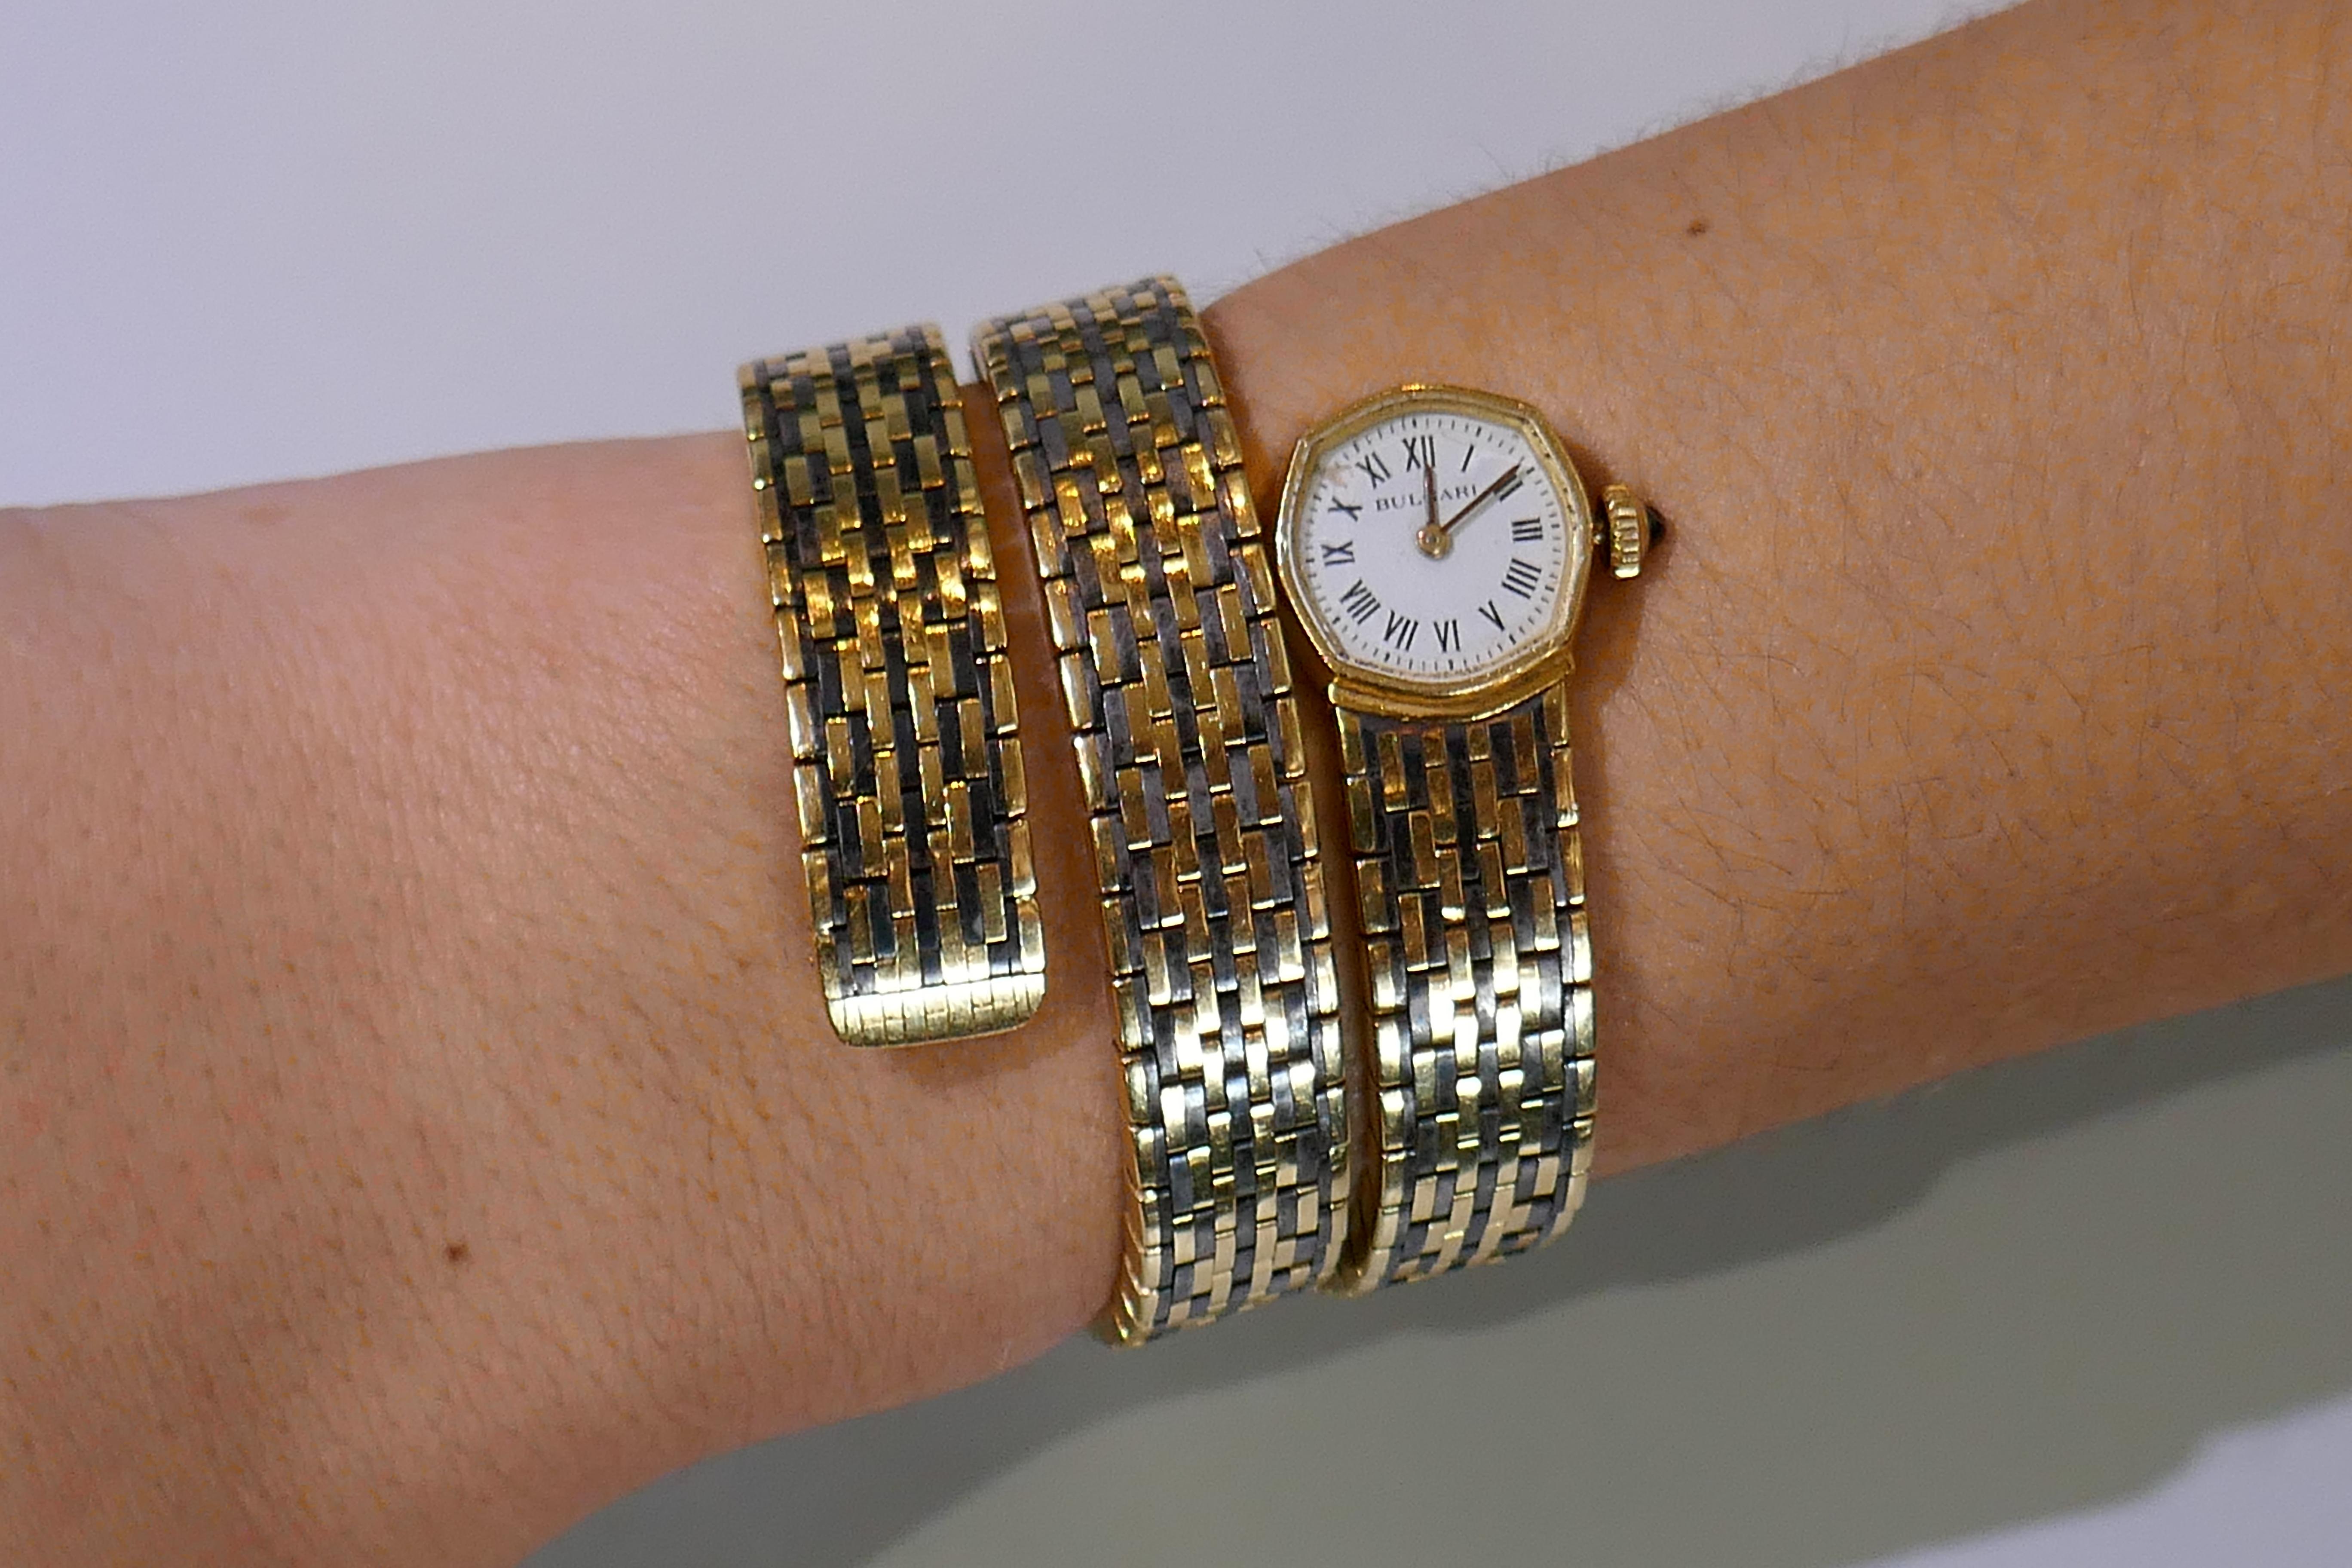 Iconic Bvlgari wrap bracelet watch created in Italy in the 1970s. 
Made of 18 karat yellow gold and hematite.
Fits up to 6-inch (15-centimeters) wrist.
Weight is 105.3 grams.
Stamped with Bulgari maker's mark and serial number.
